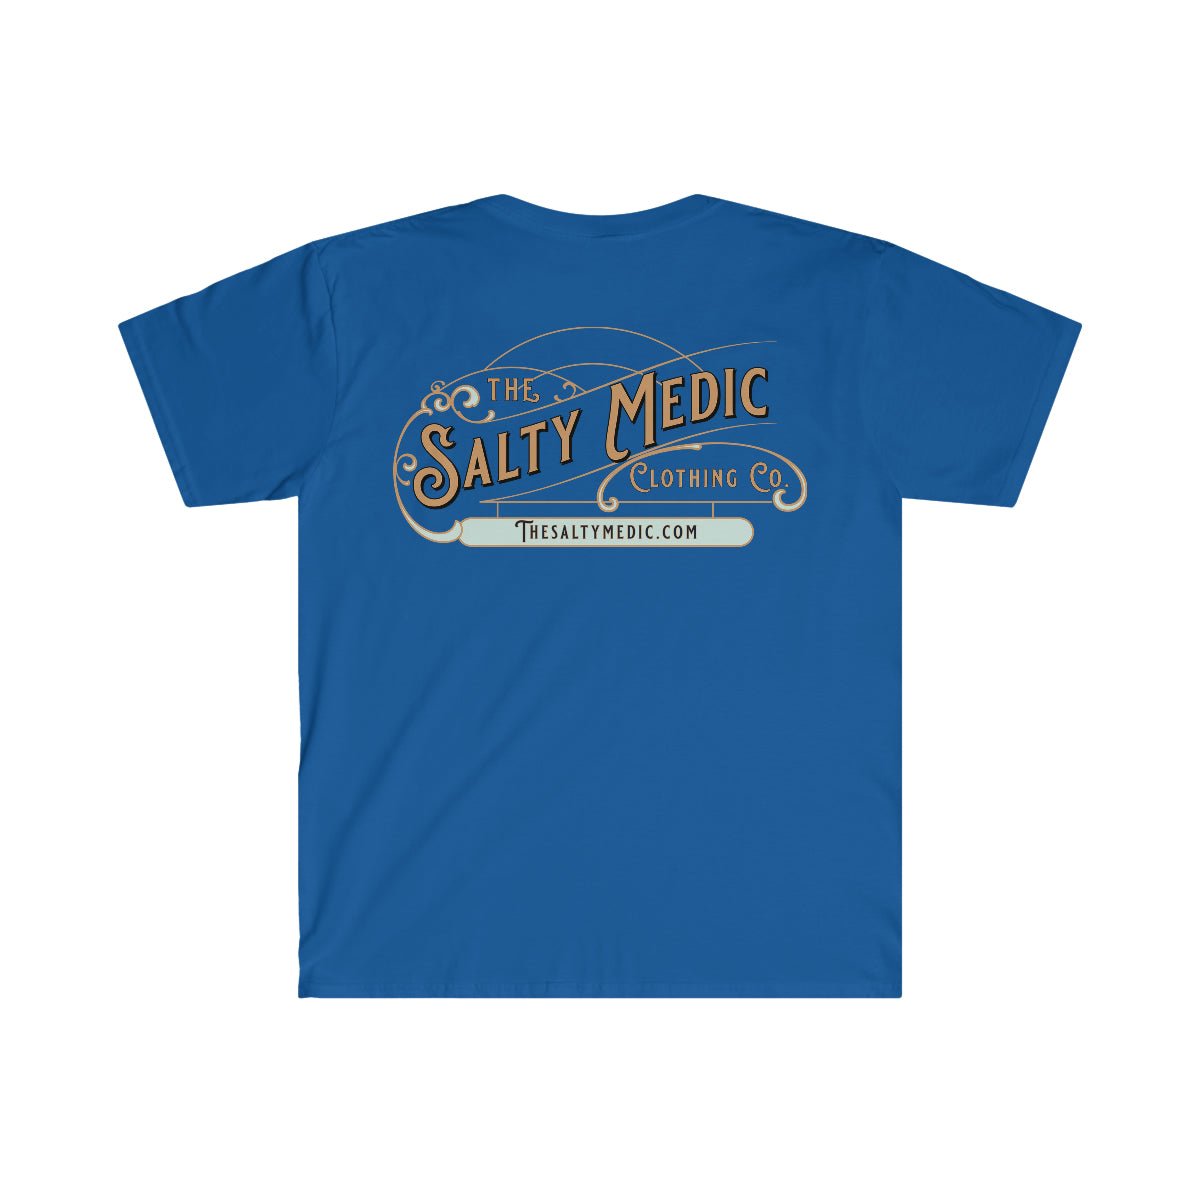 It's Beer Time Softstyle T-Shirt - Salty Medic Clothing Co.